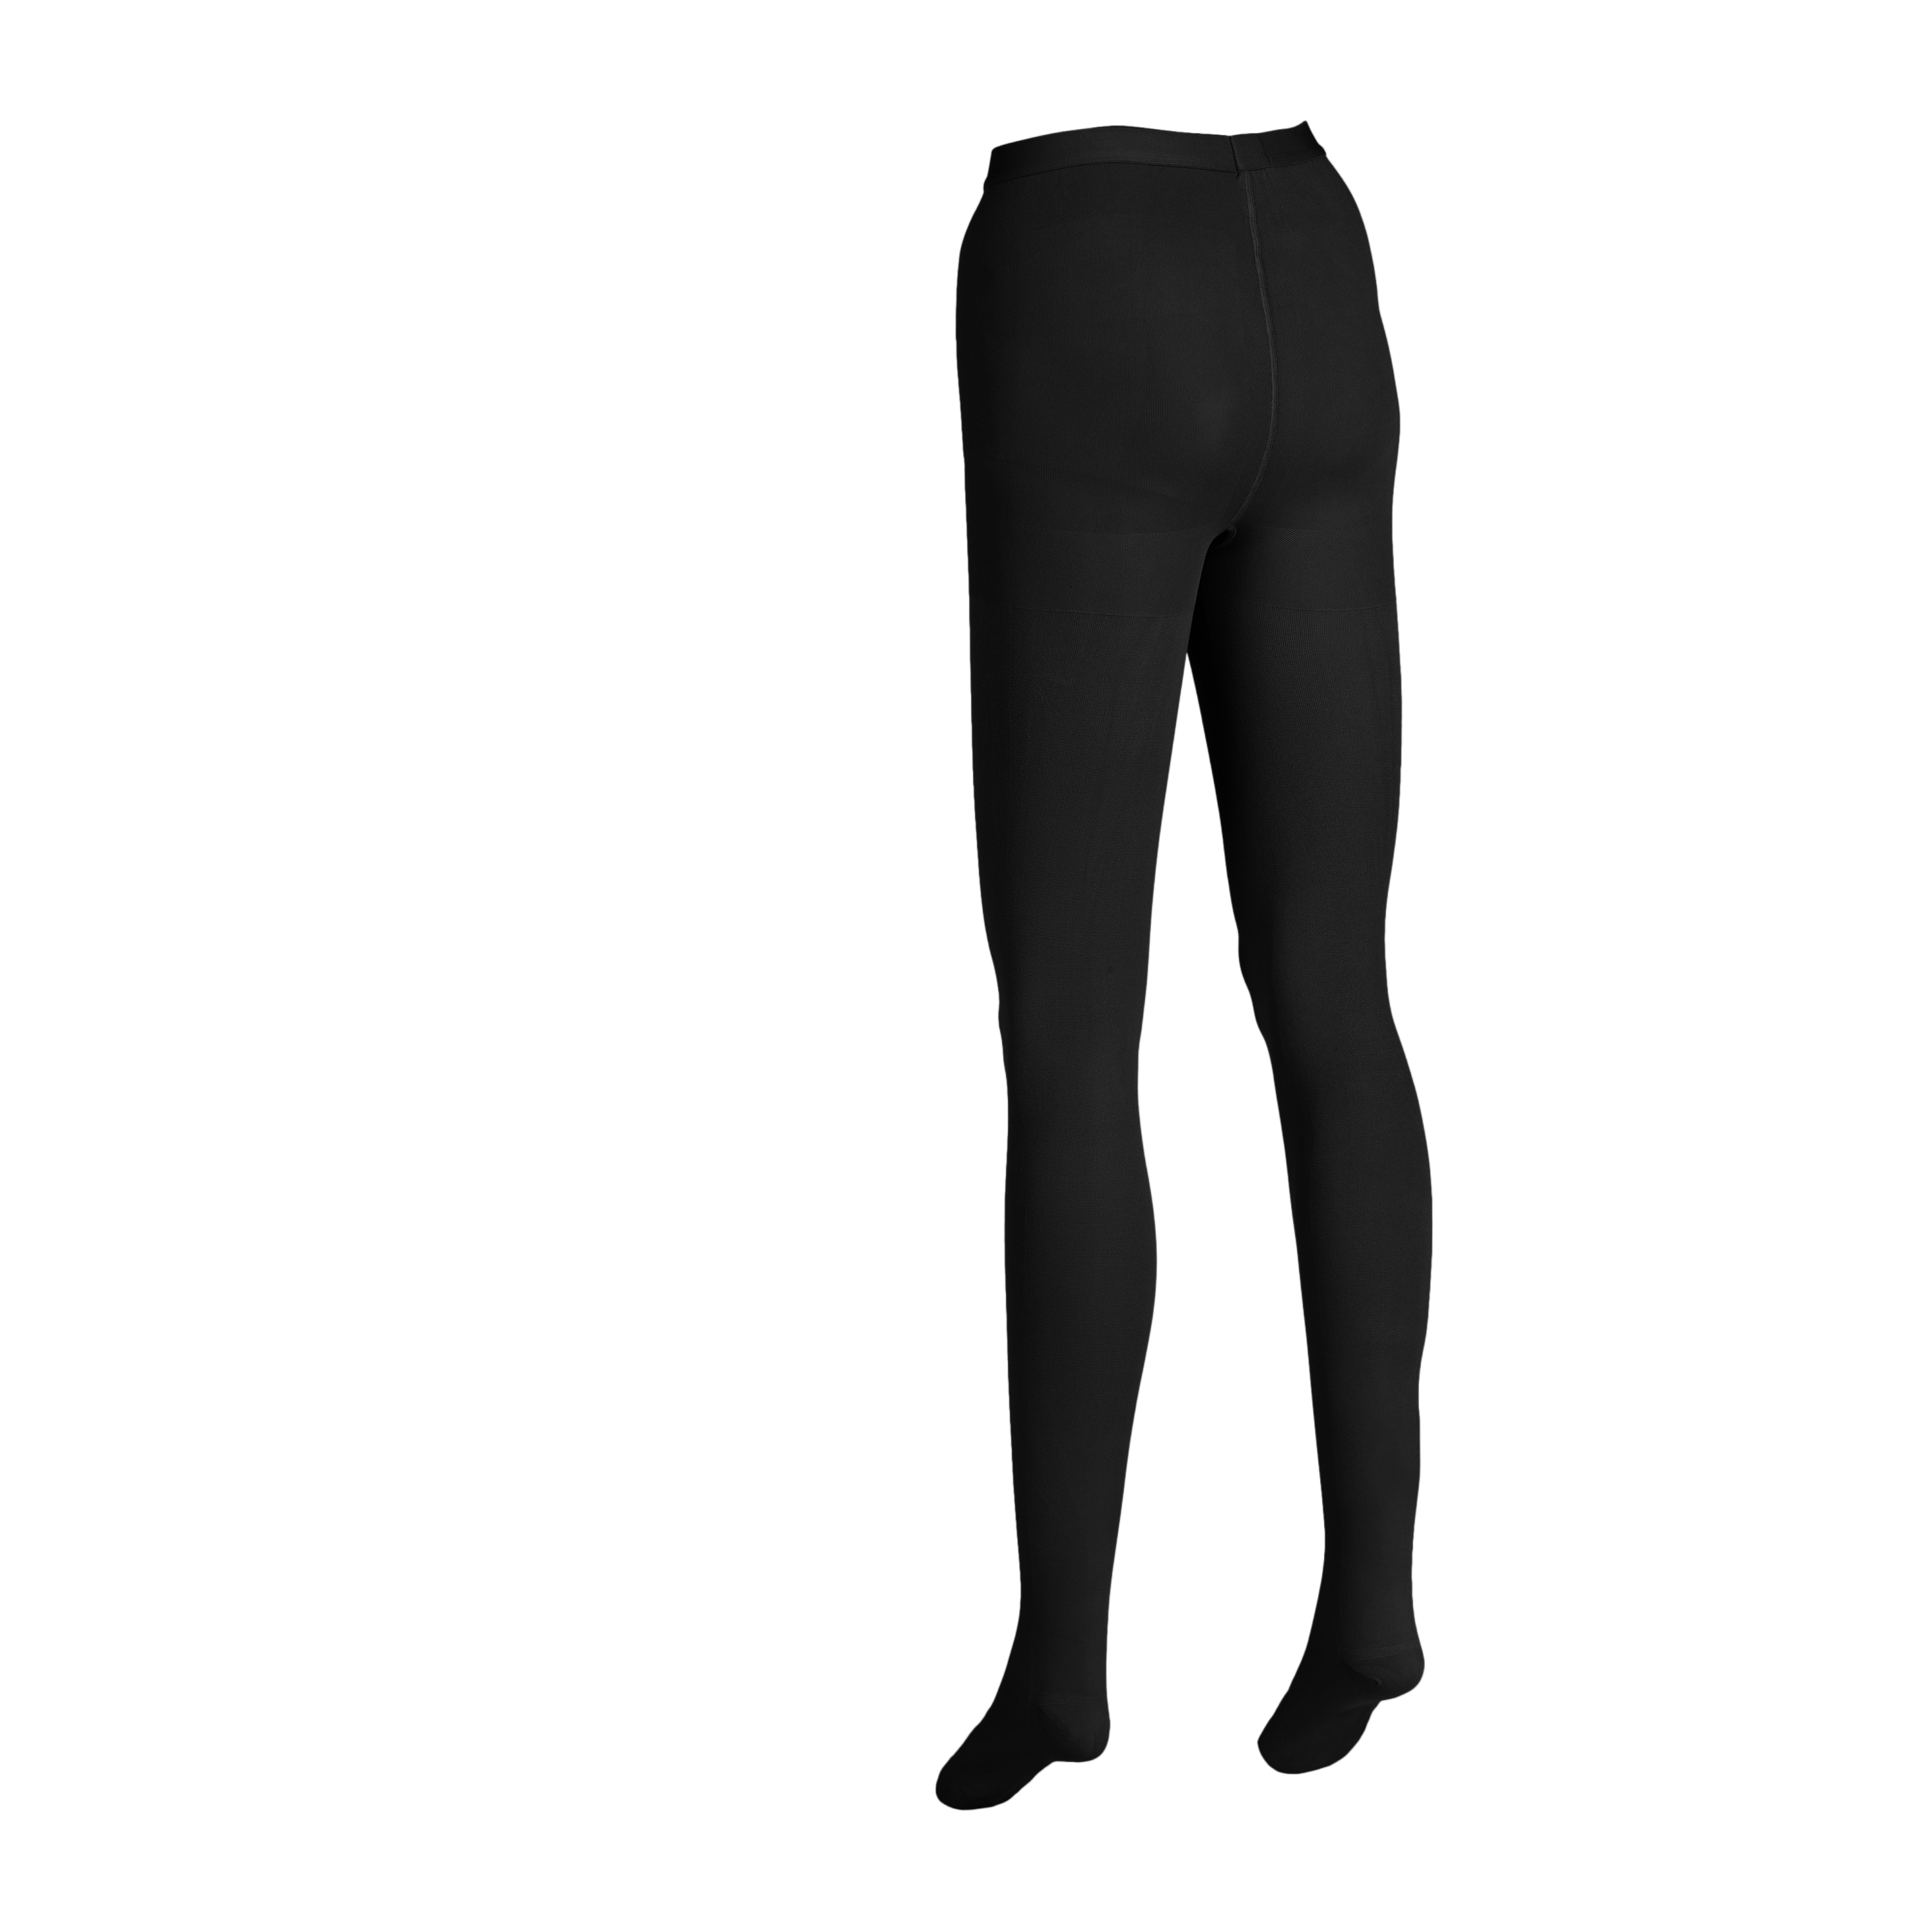  Plus Size Compression Tights For Women Circulation